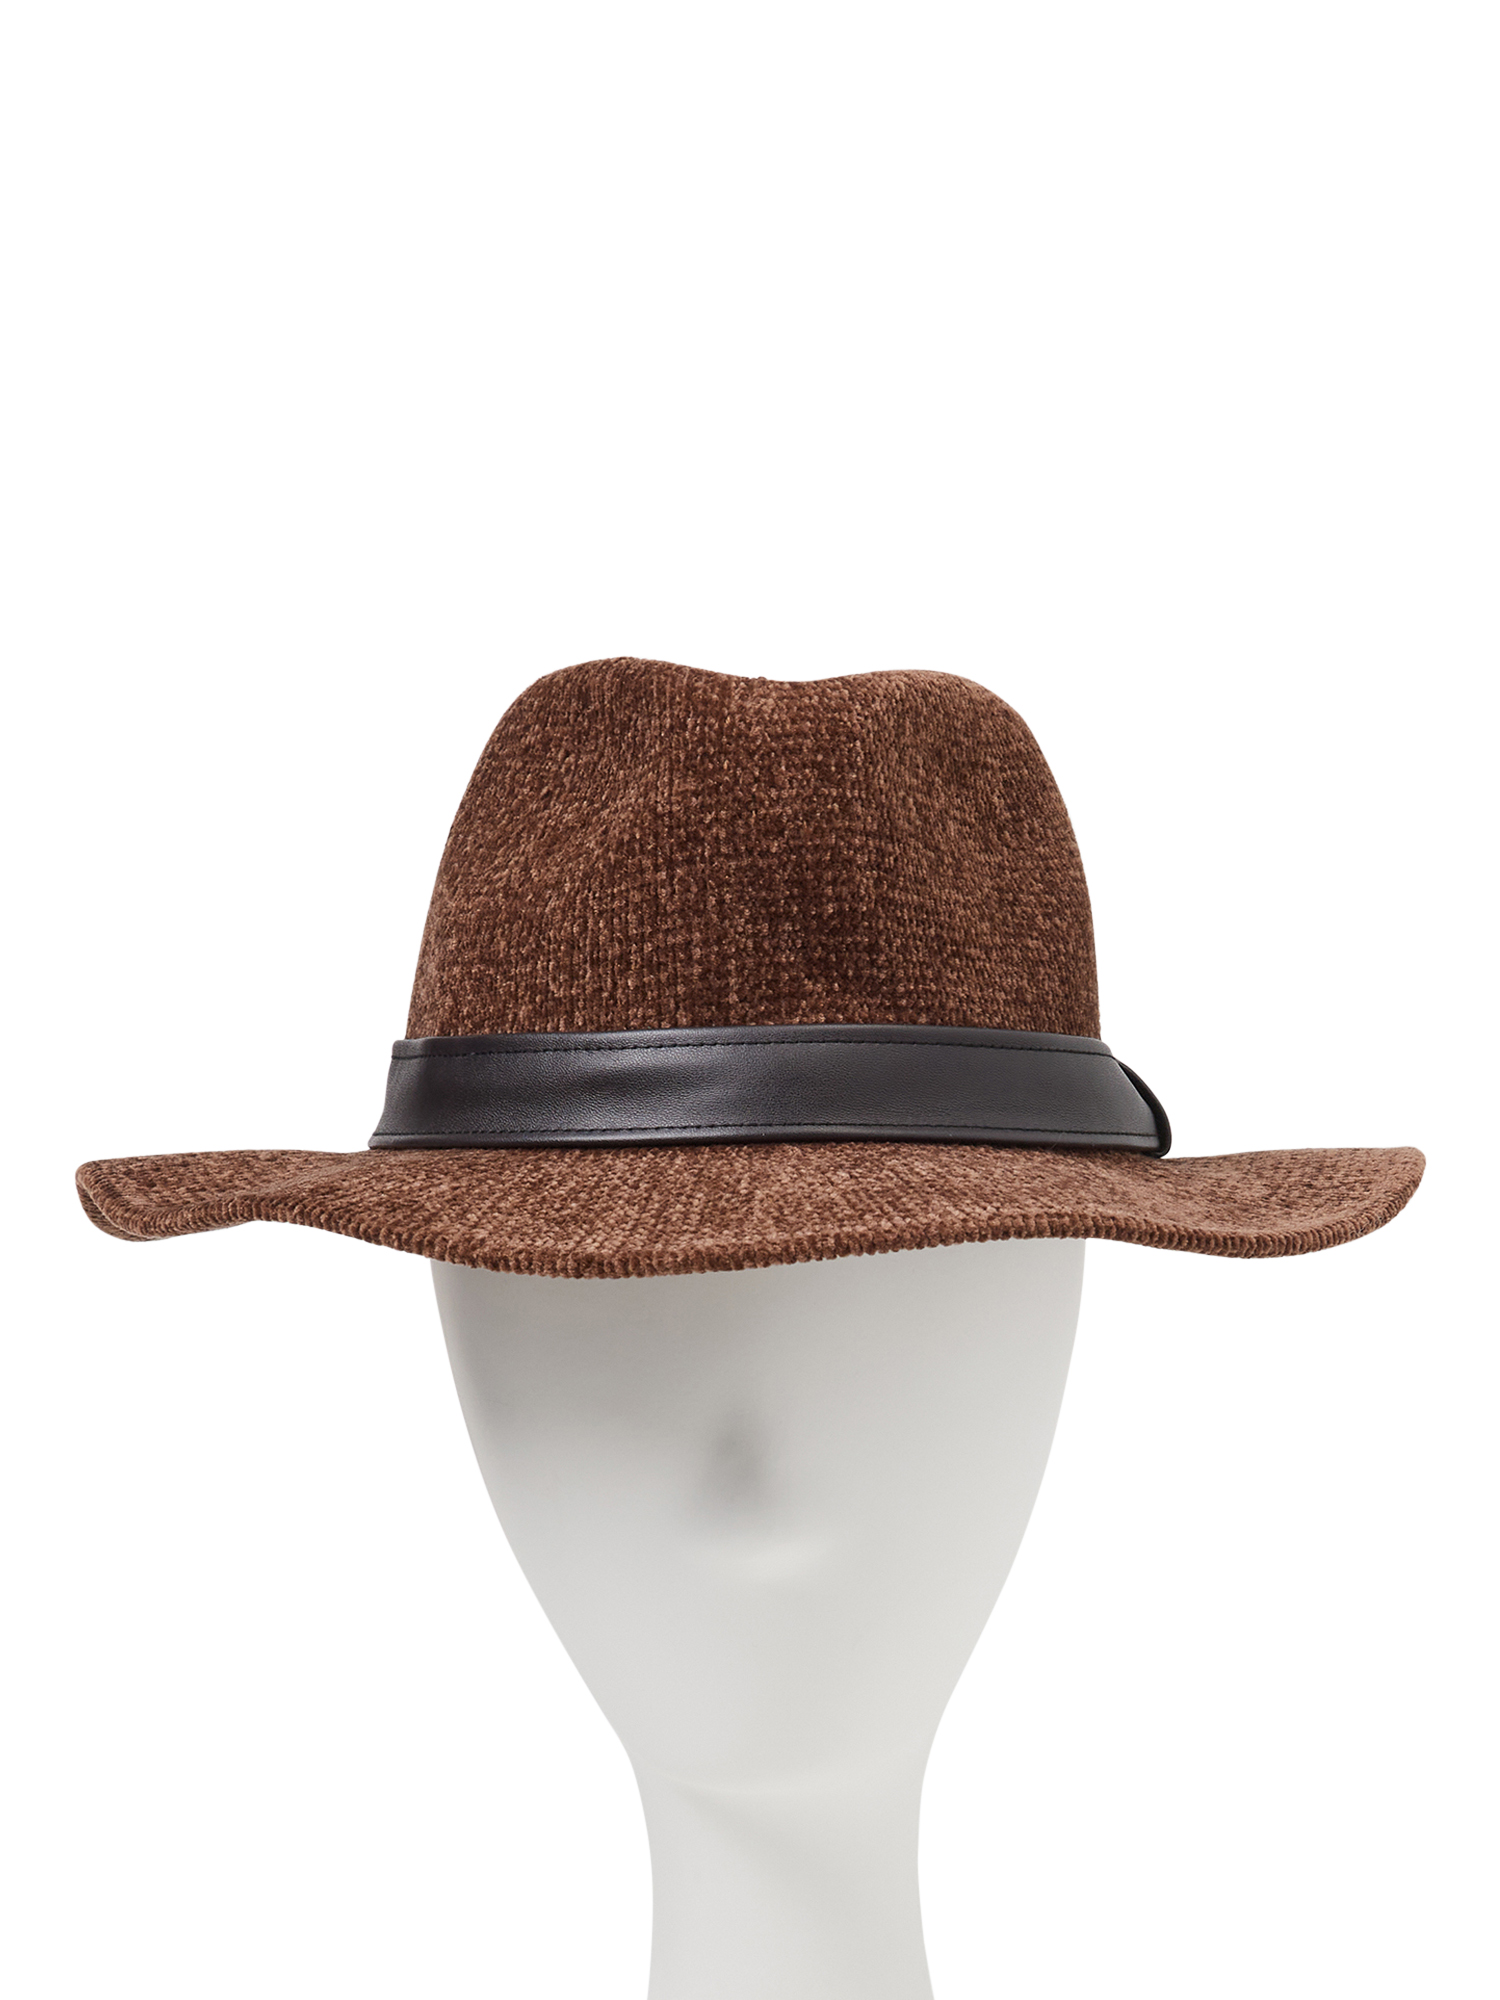 Scoop Adult Female Chenille Fedora with Faux Leather Trim - image 3 of 3